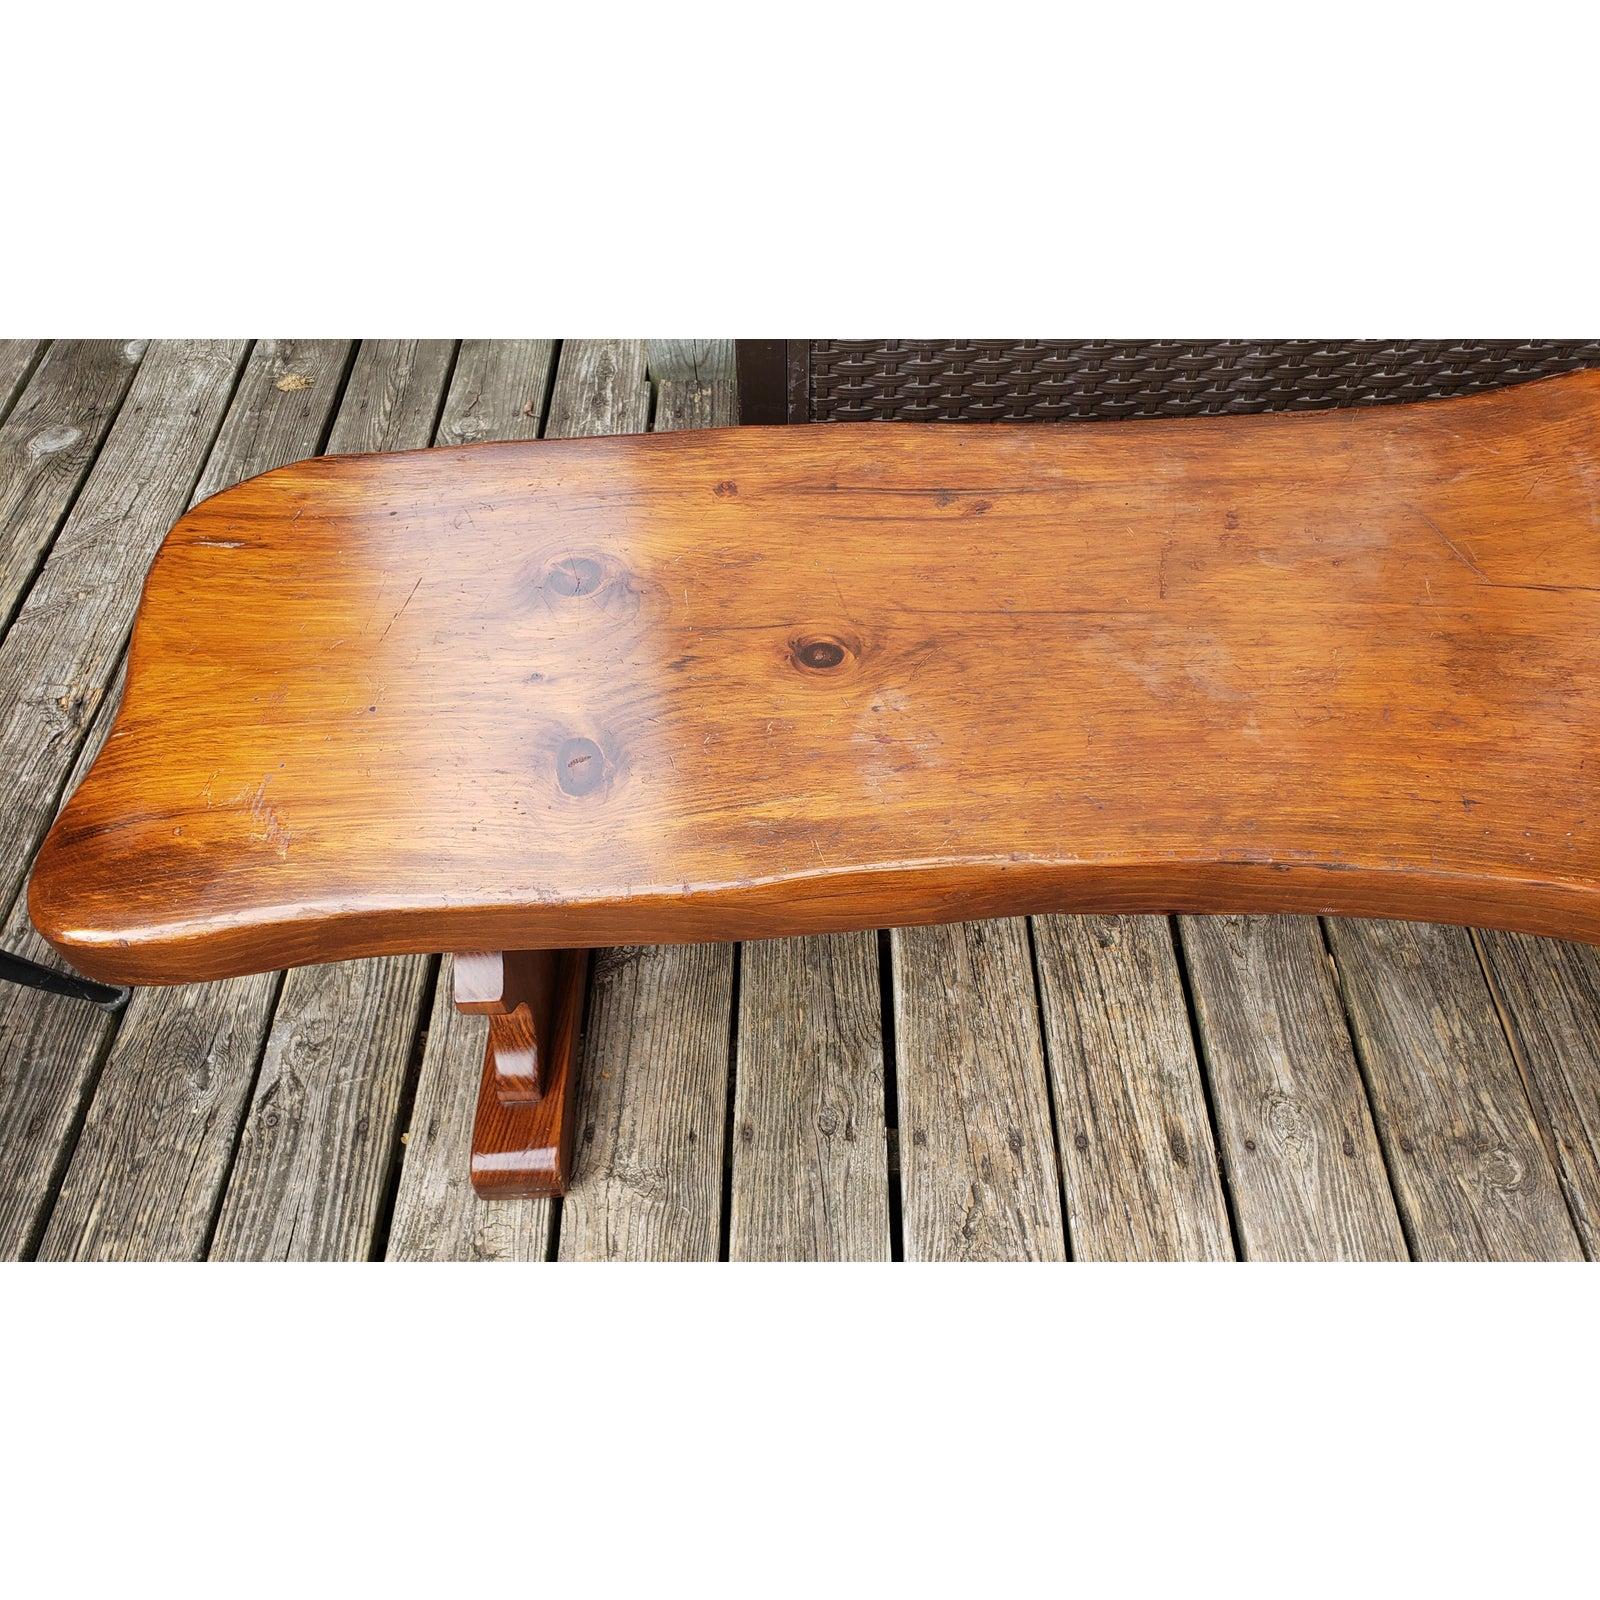 1980s Handcrafted Polished Walnut Pine Wood Slabs Trestle Coffee Table For Sale 1